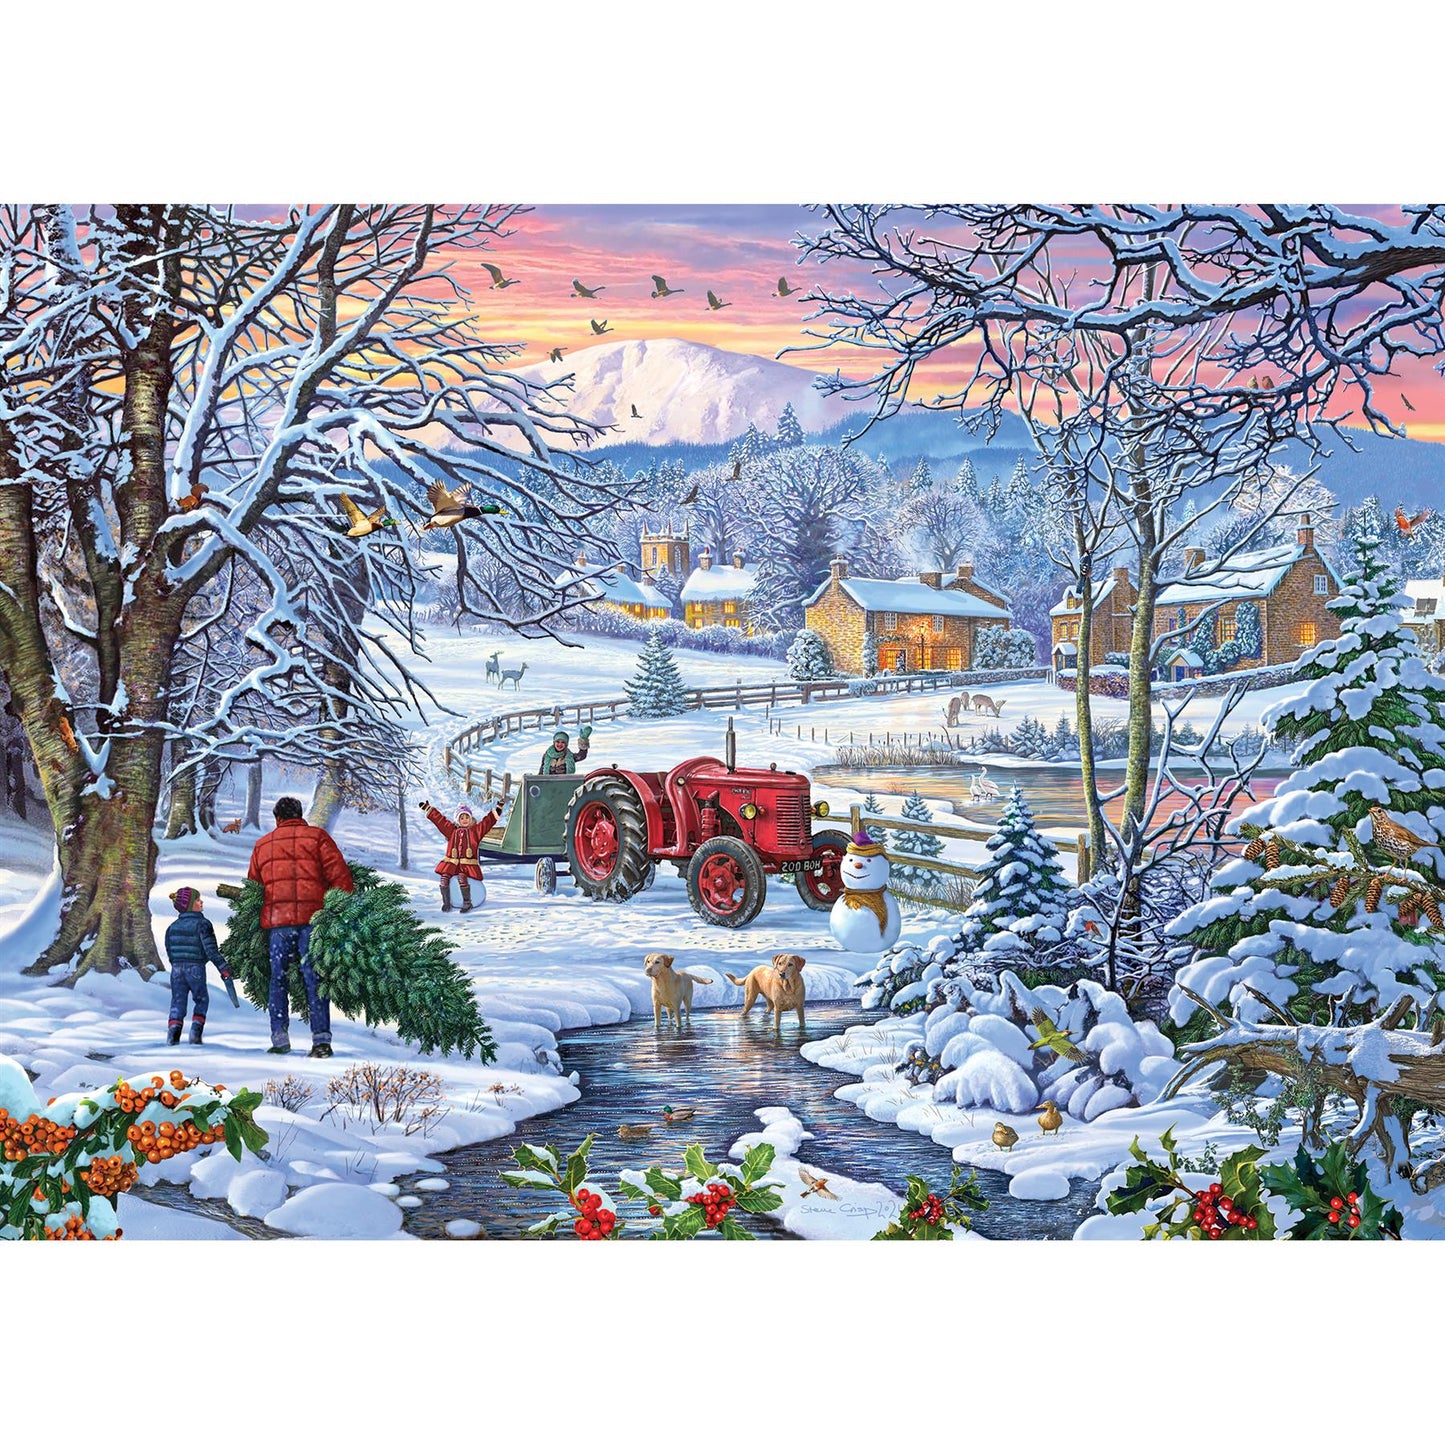 Bringing Home the Tree 1000 Piece Jigsaw Puzzle